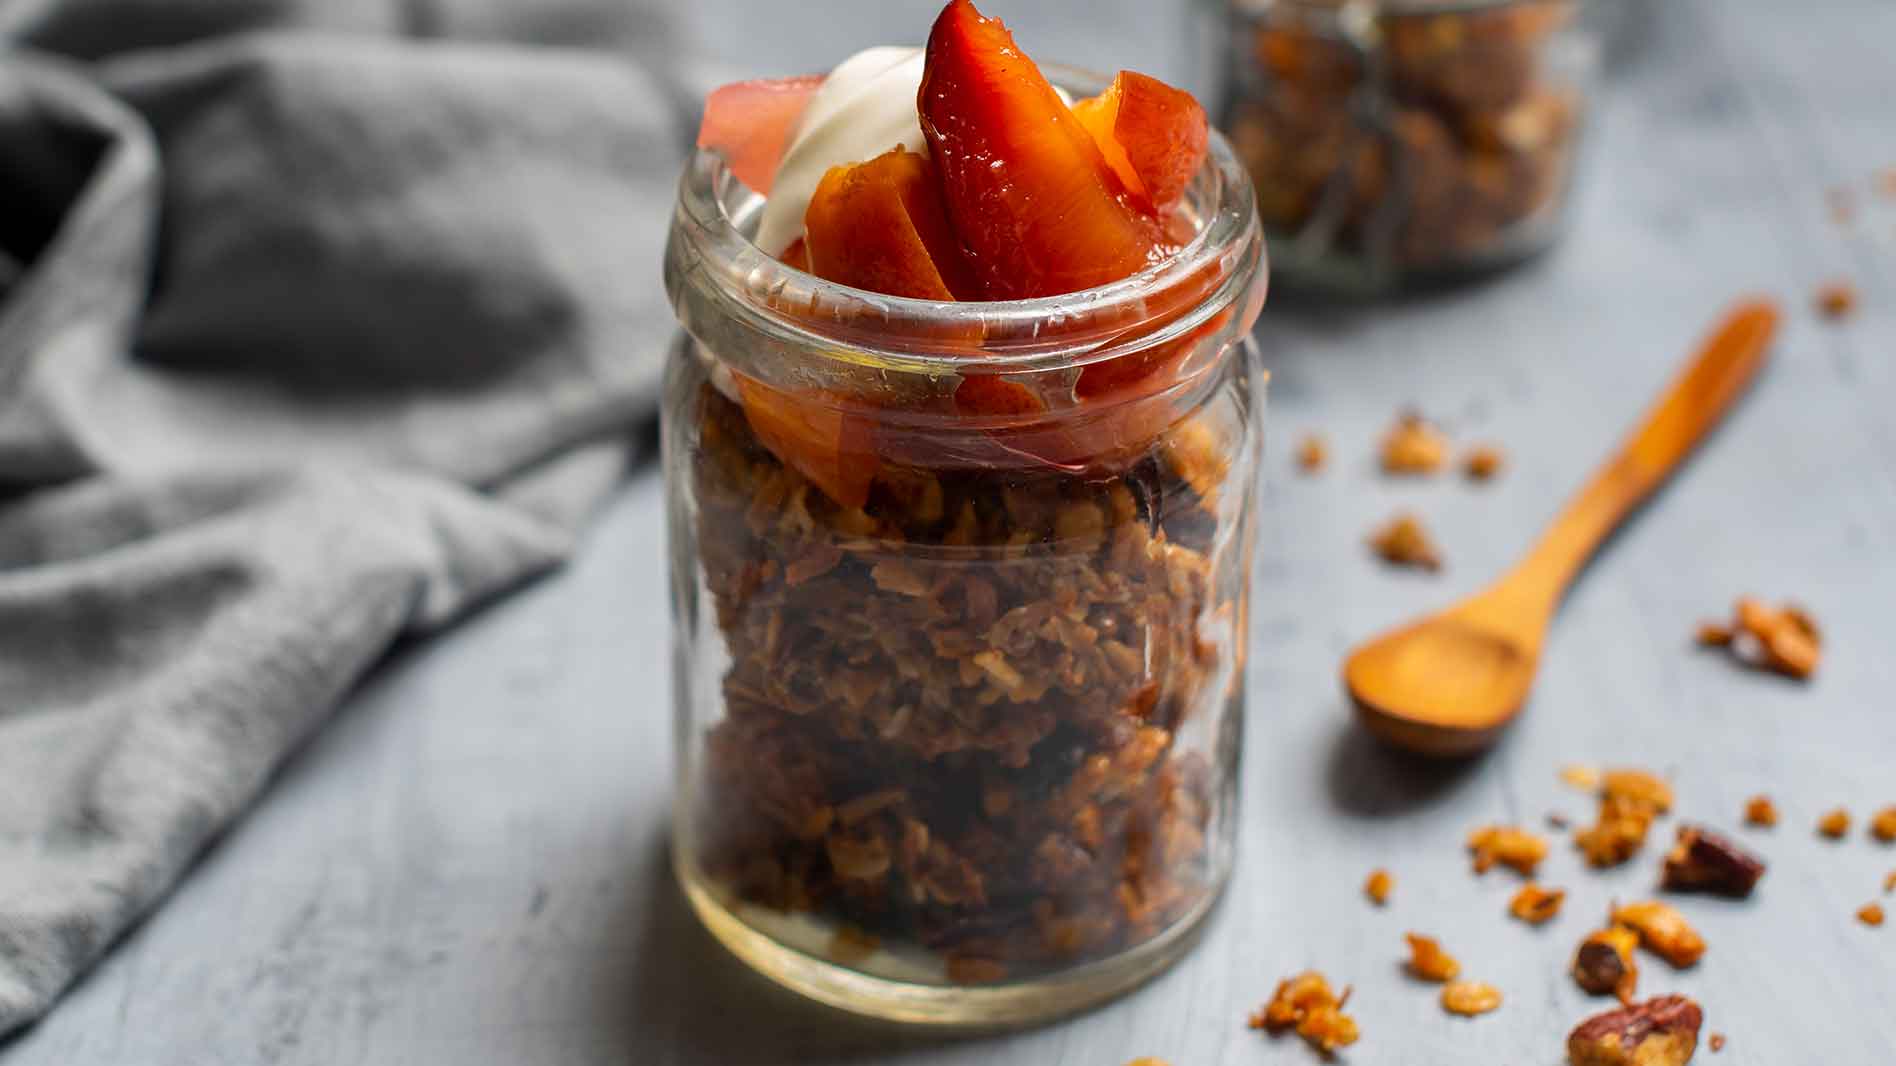 Homemade granola with honey and poached fruits